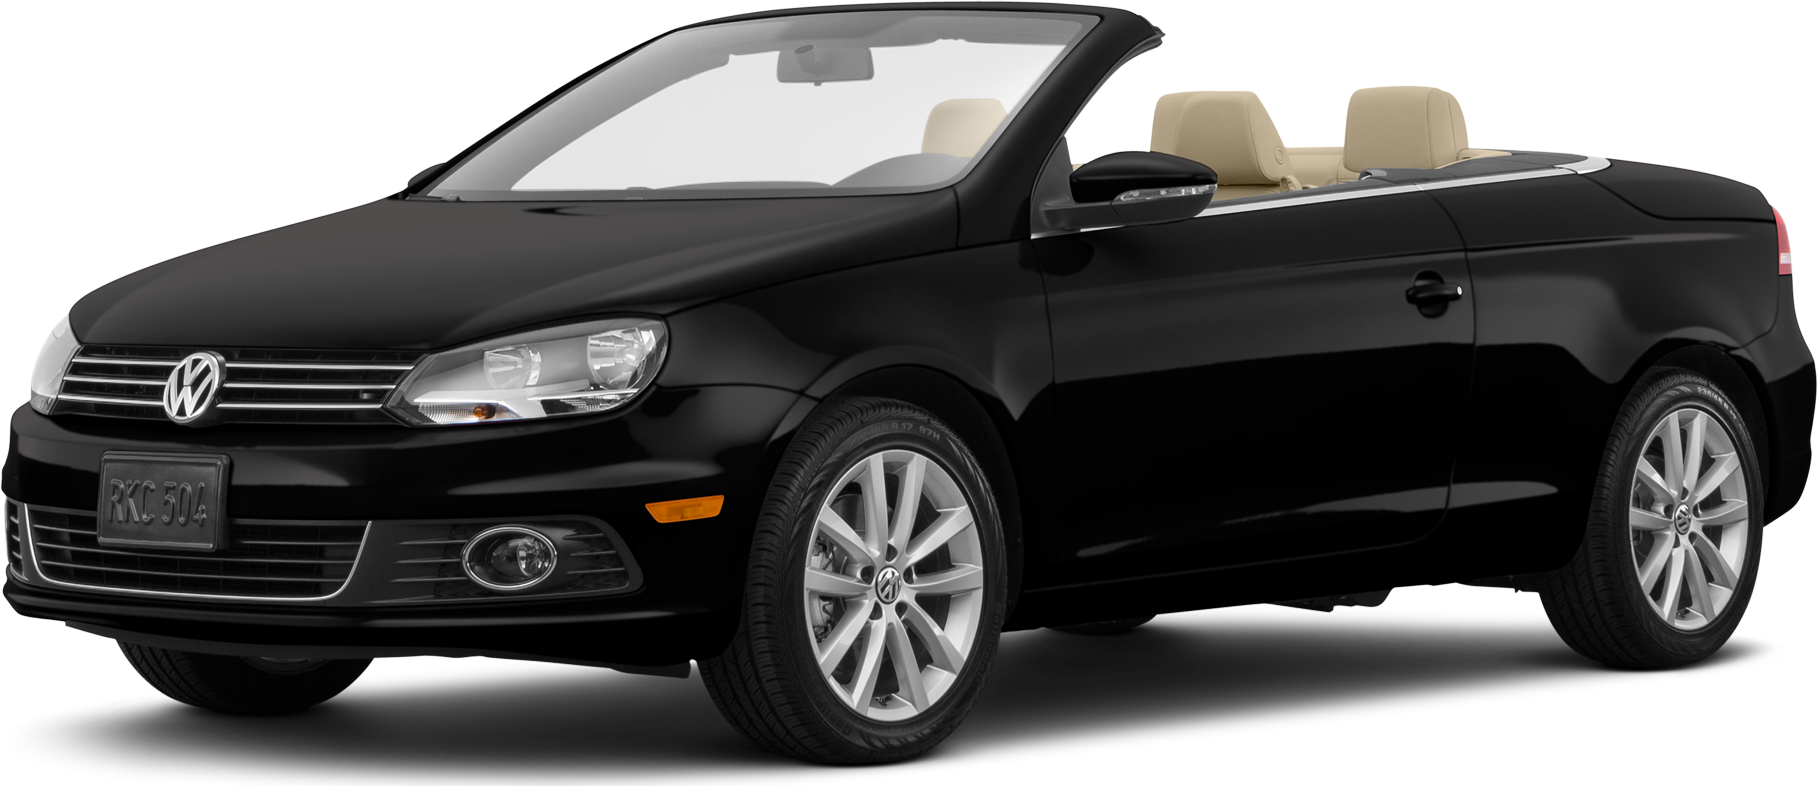 2016 Volkswagen Eos Values & Cars for Sale | Kelley Blue Book